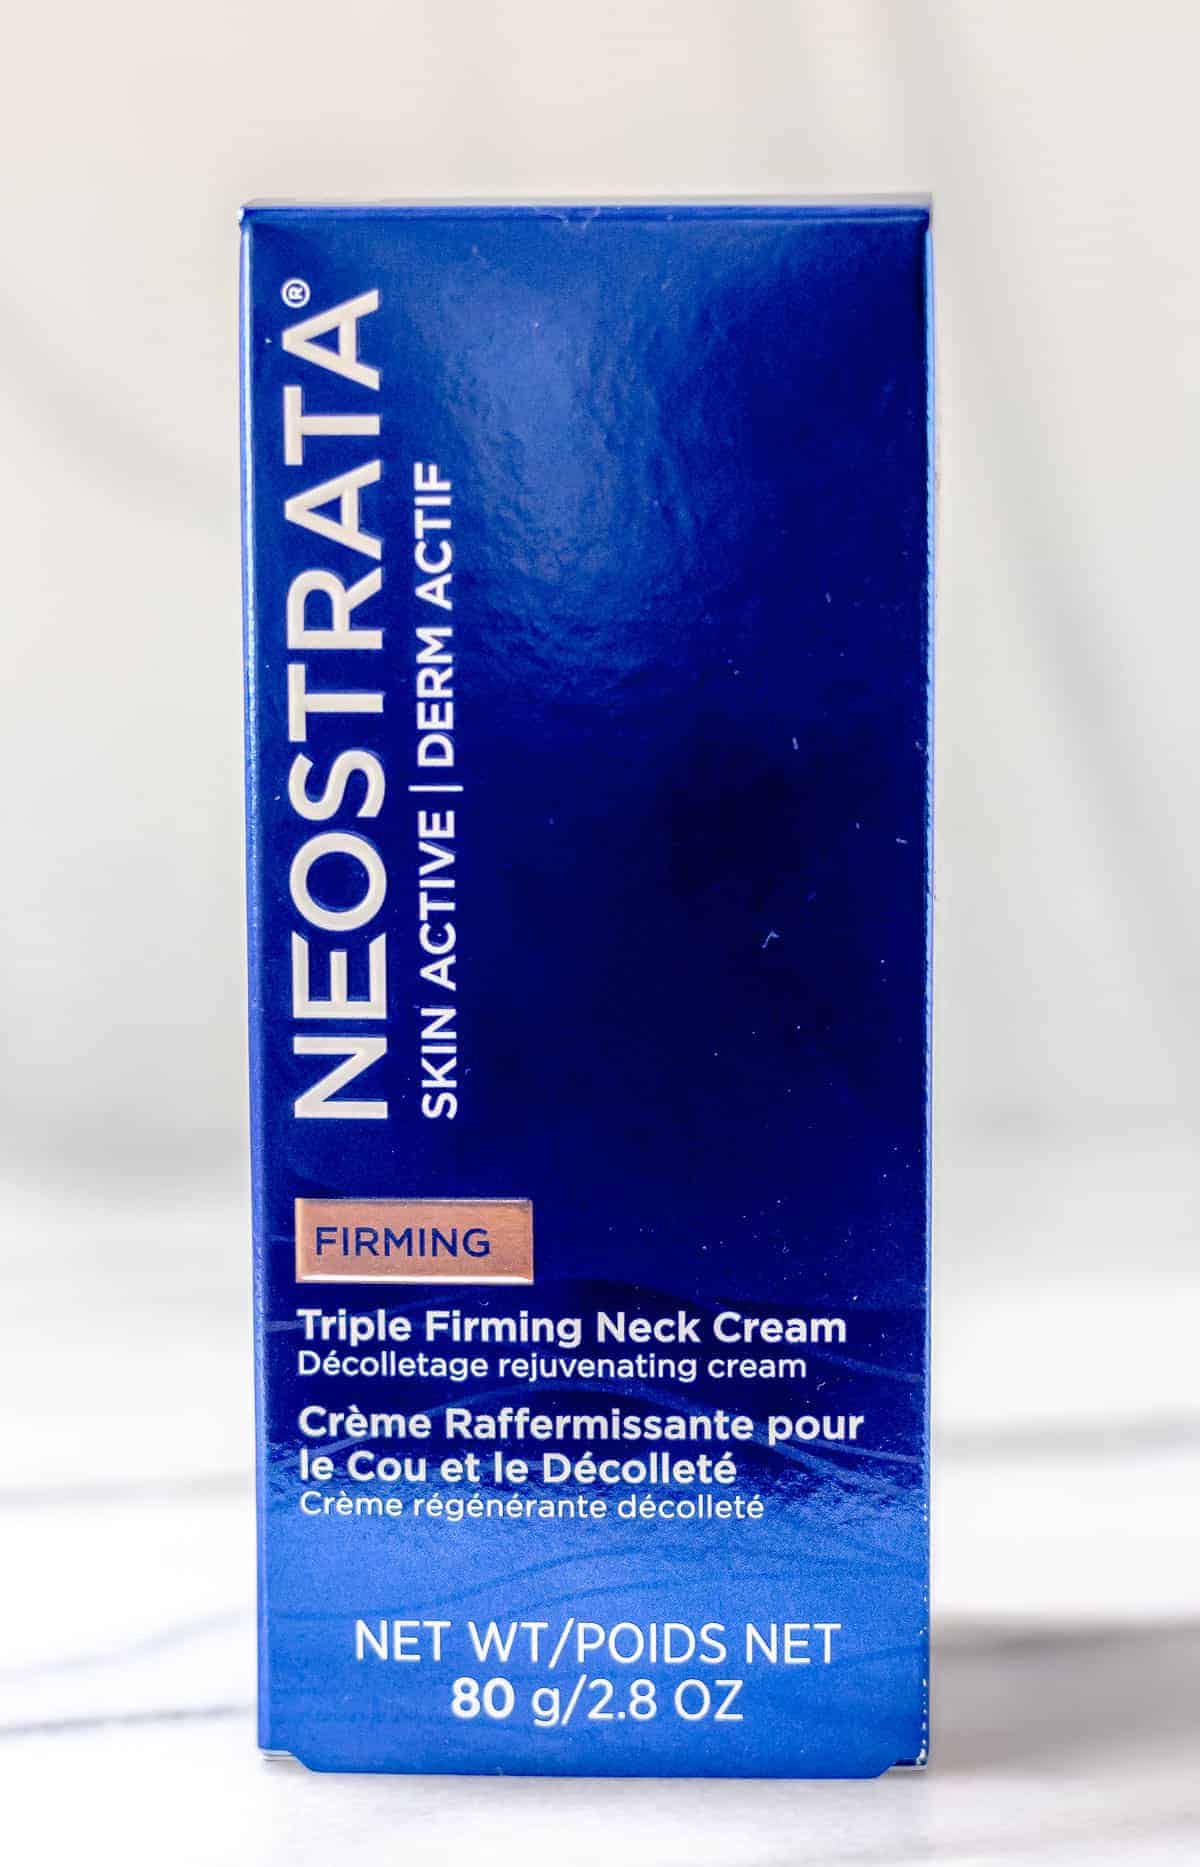 Neostrata Firming Neck Cream box with a white background